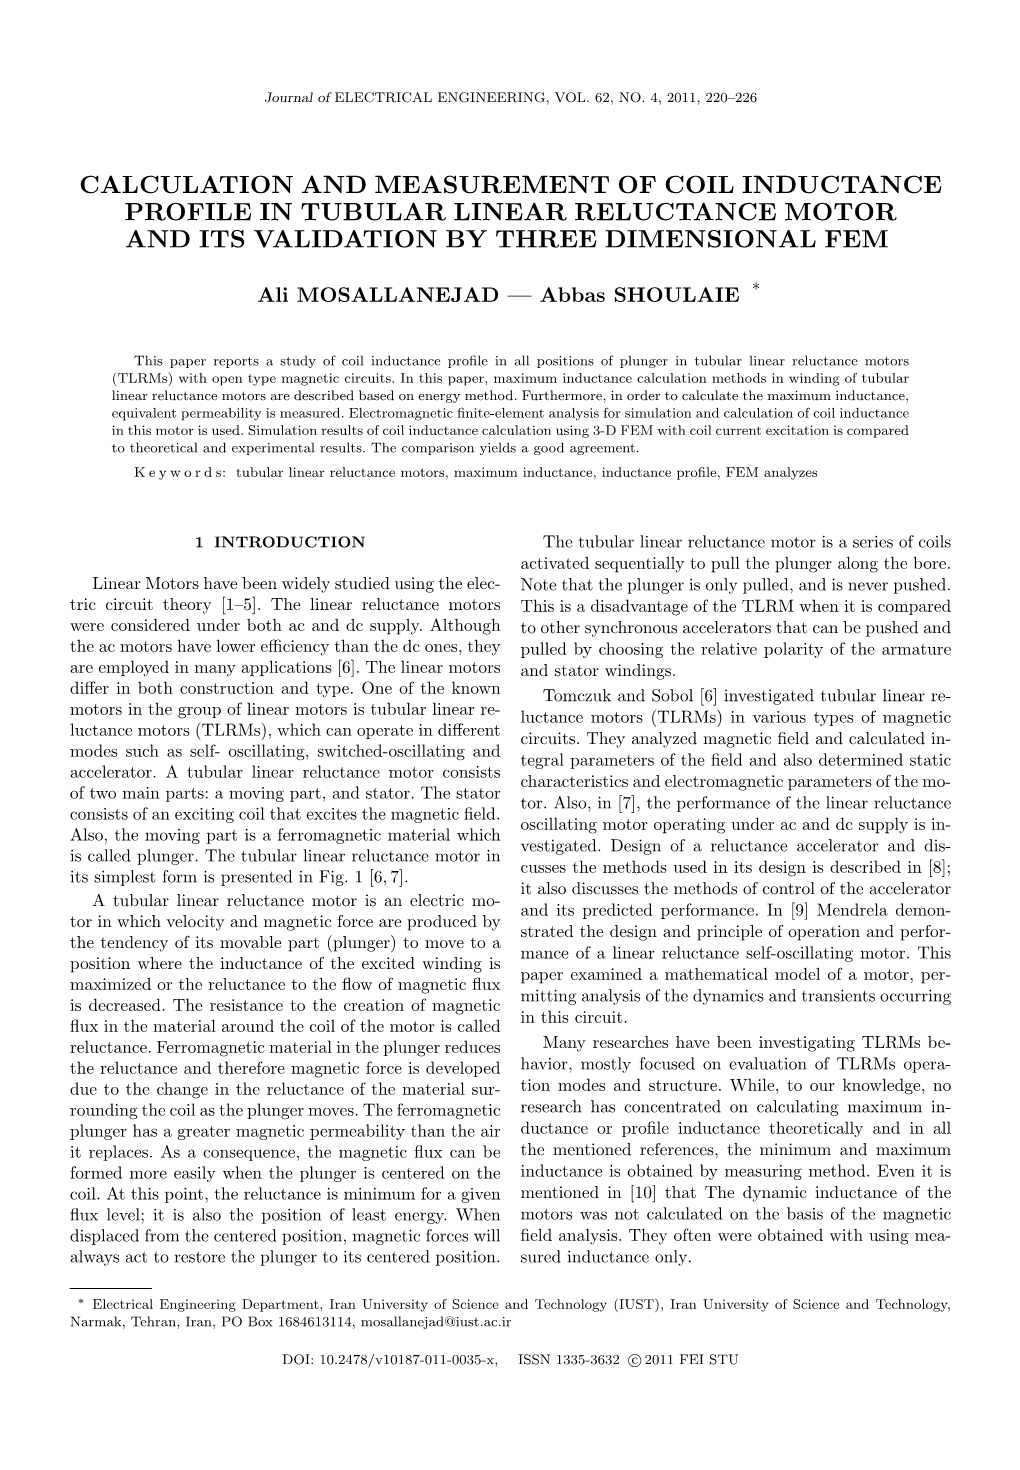 Calculation and Measurement of Coil Inductance Profile in Tubular Linear Reluctance Motor and Its Validation by Three Dimensional Fem